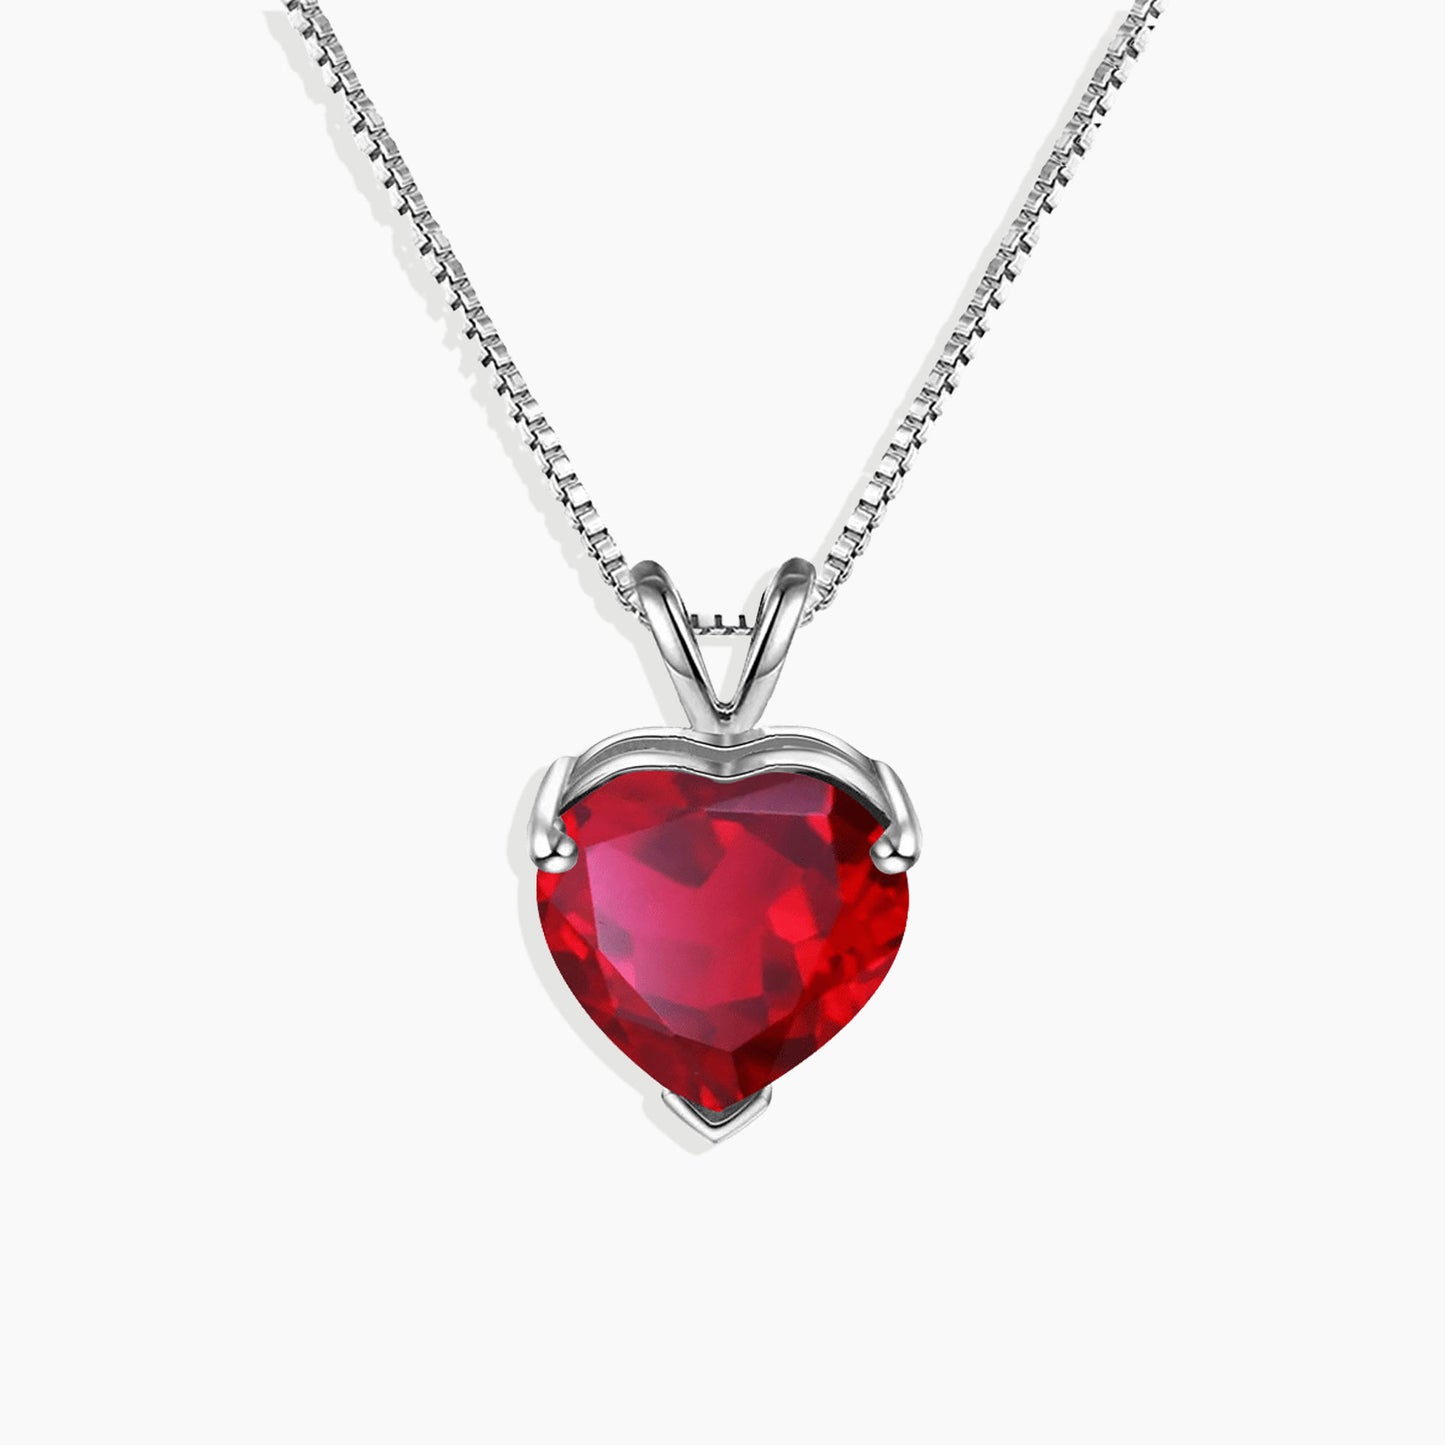 Heart Shaped Gemstone Necklace in Sterling Silver -  Ruby